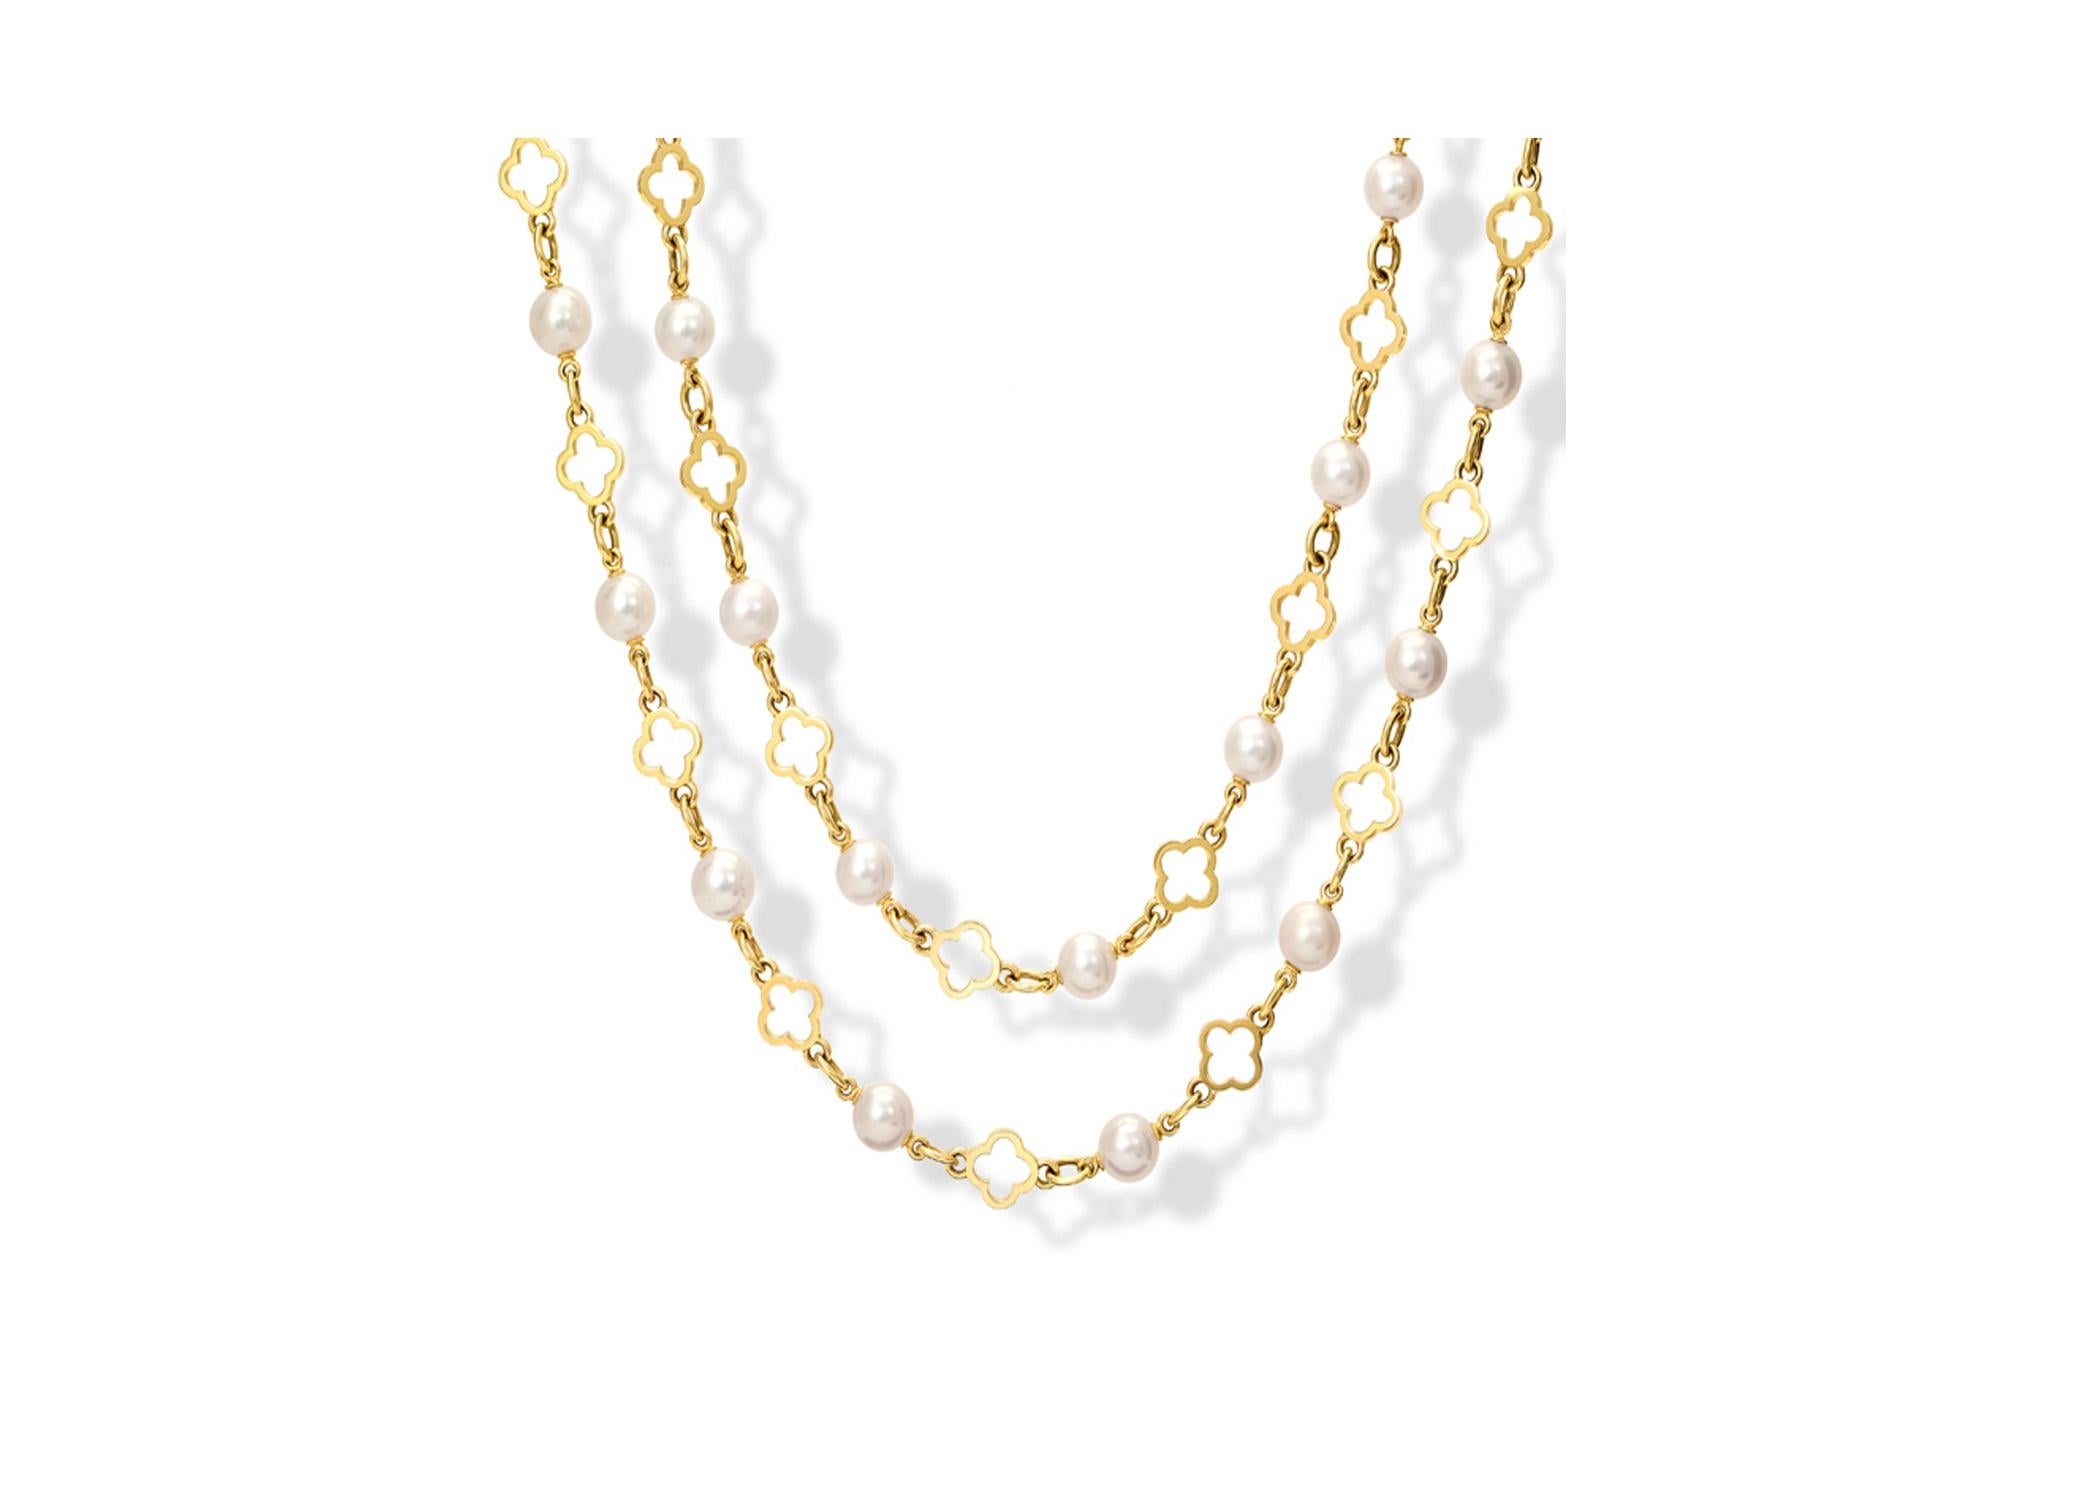 Star Anise necklace in 9 karat yellow gold with eight fresh water pearls. Inspired on the lattice windows in Suzhou. From the Journey to China.

The necklace measures 16